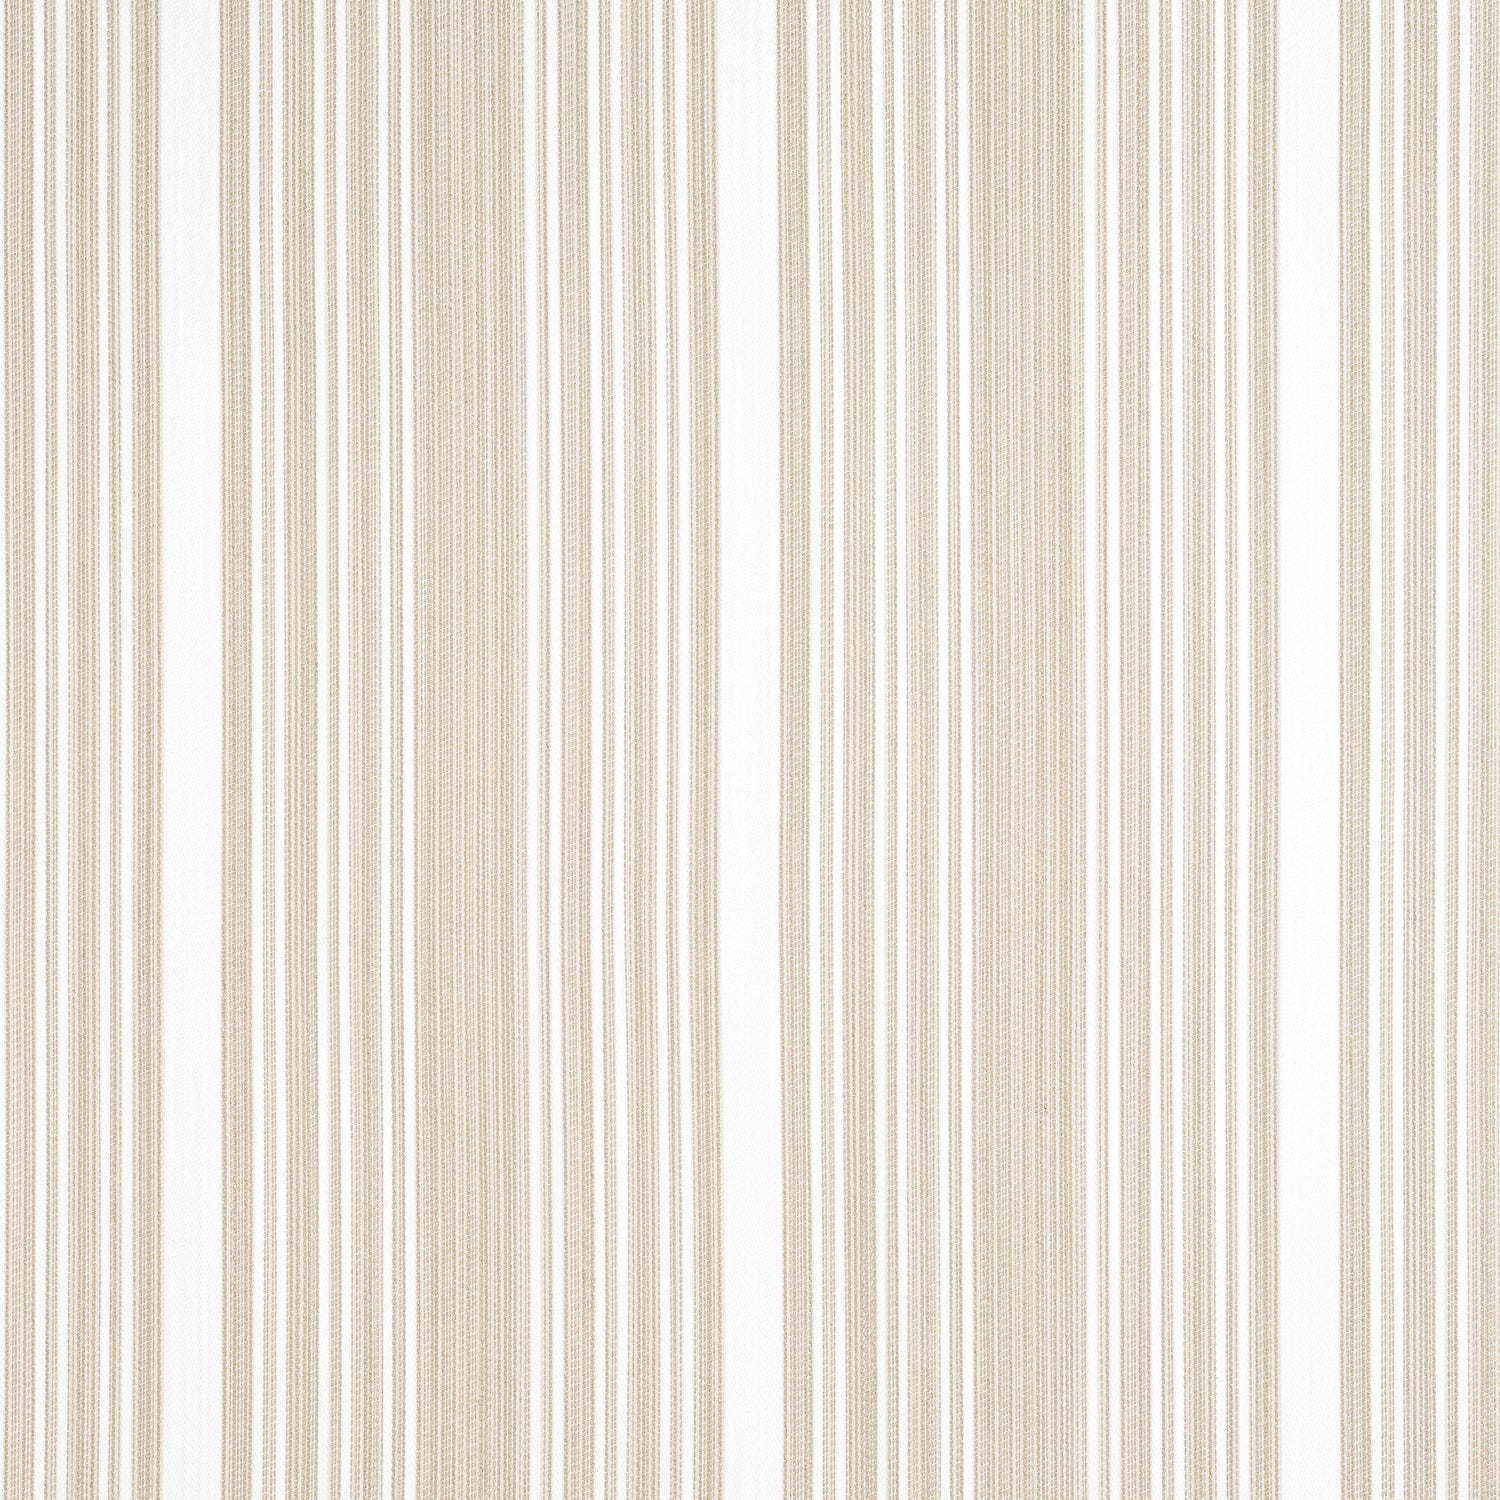 Kaia Stripe fabric in sand color - pattern number W8535 - by Thibaut in the Villa collection